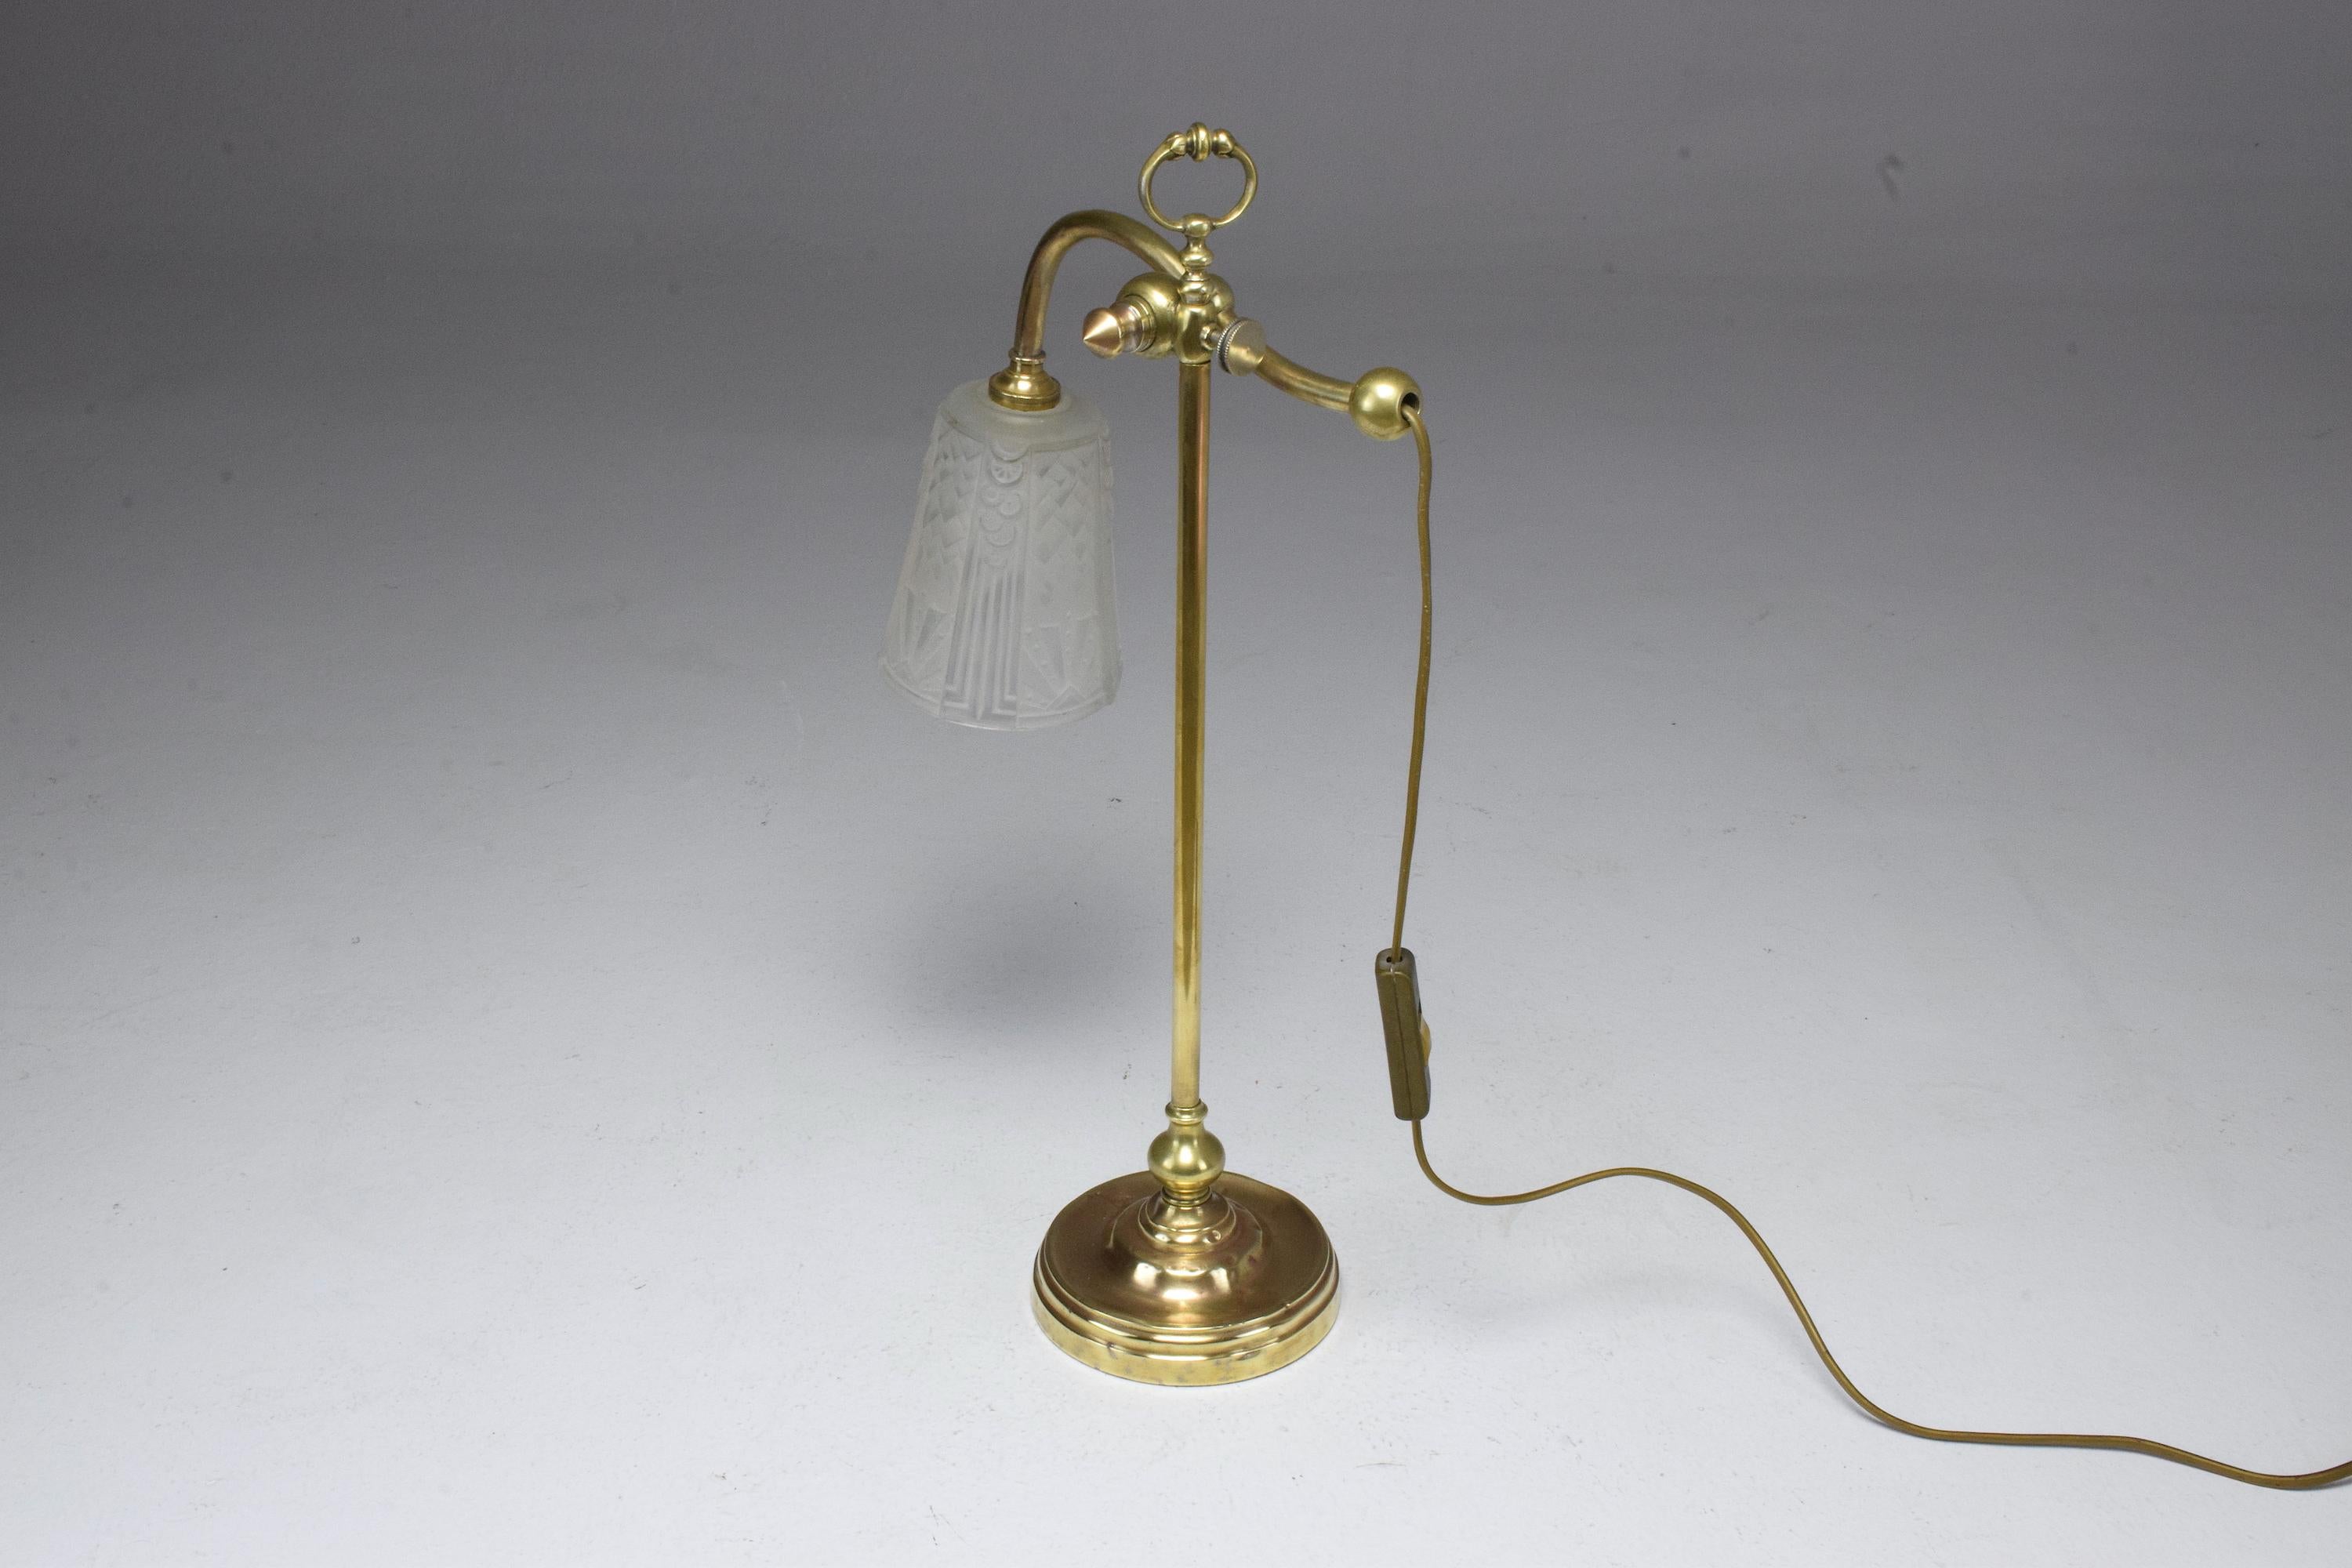 Historic 20th century vintage table or desk lamp designed with the signature detailed Art Deco moulded glass shade by Muller Frères and polished brass structure. Signed Freres Muller Luneville. Rewired and tested.
France, circa 1930s.

---

We are